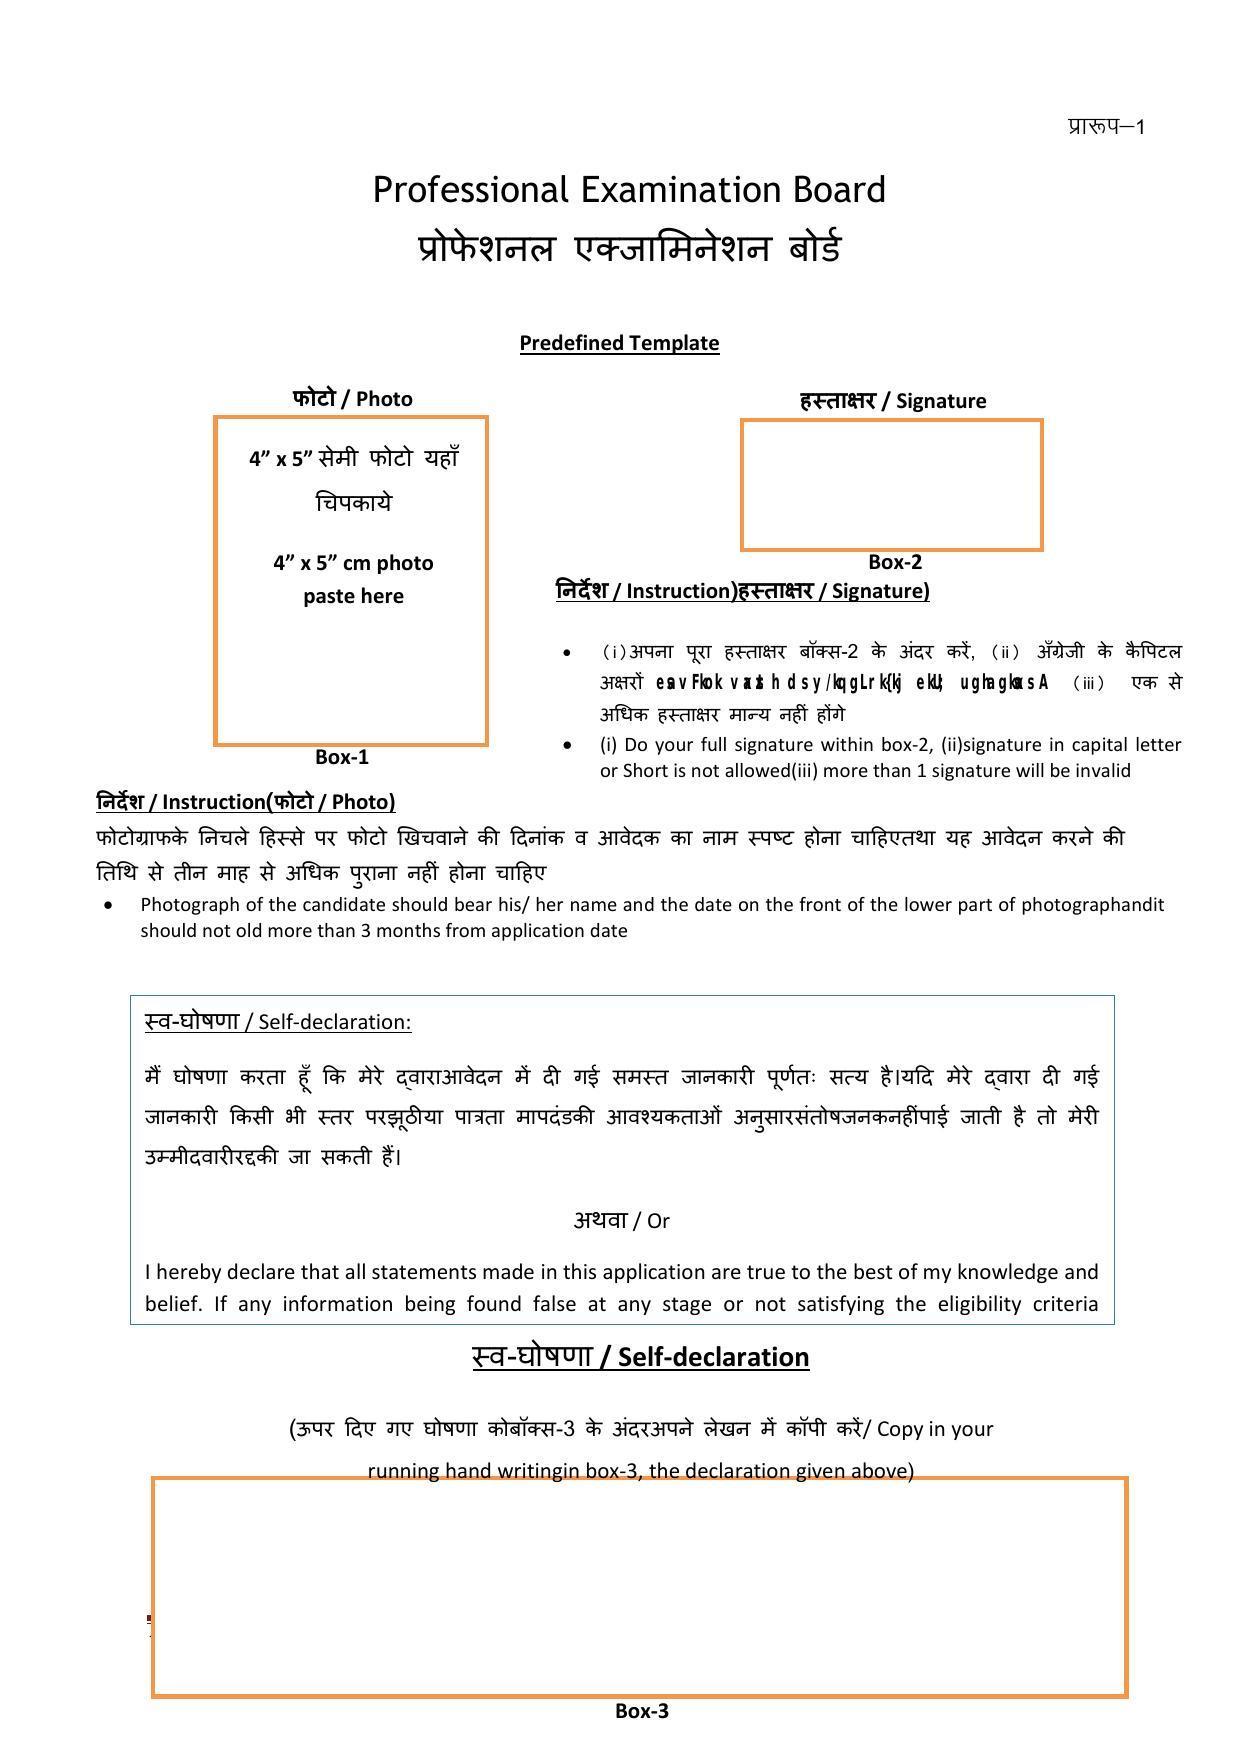 MPPEB Group-I Sub Group-I & Group-II Sub Group-I Recruitment 2022 - Page 54